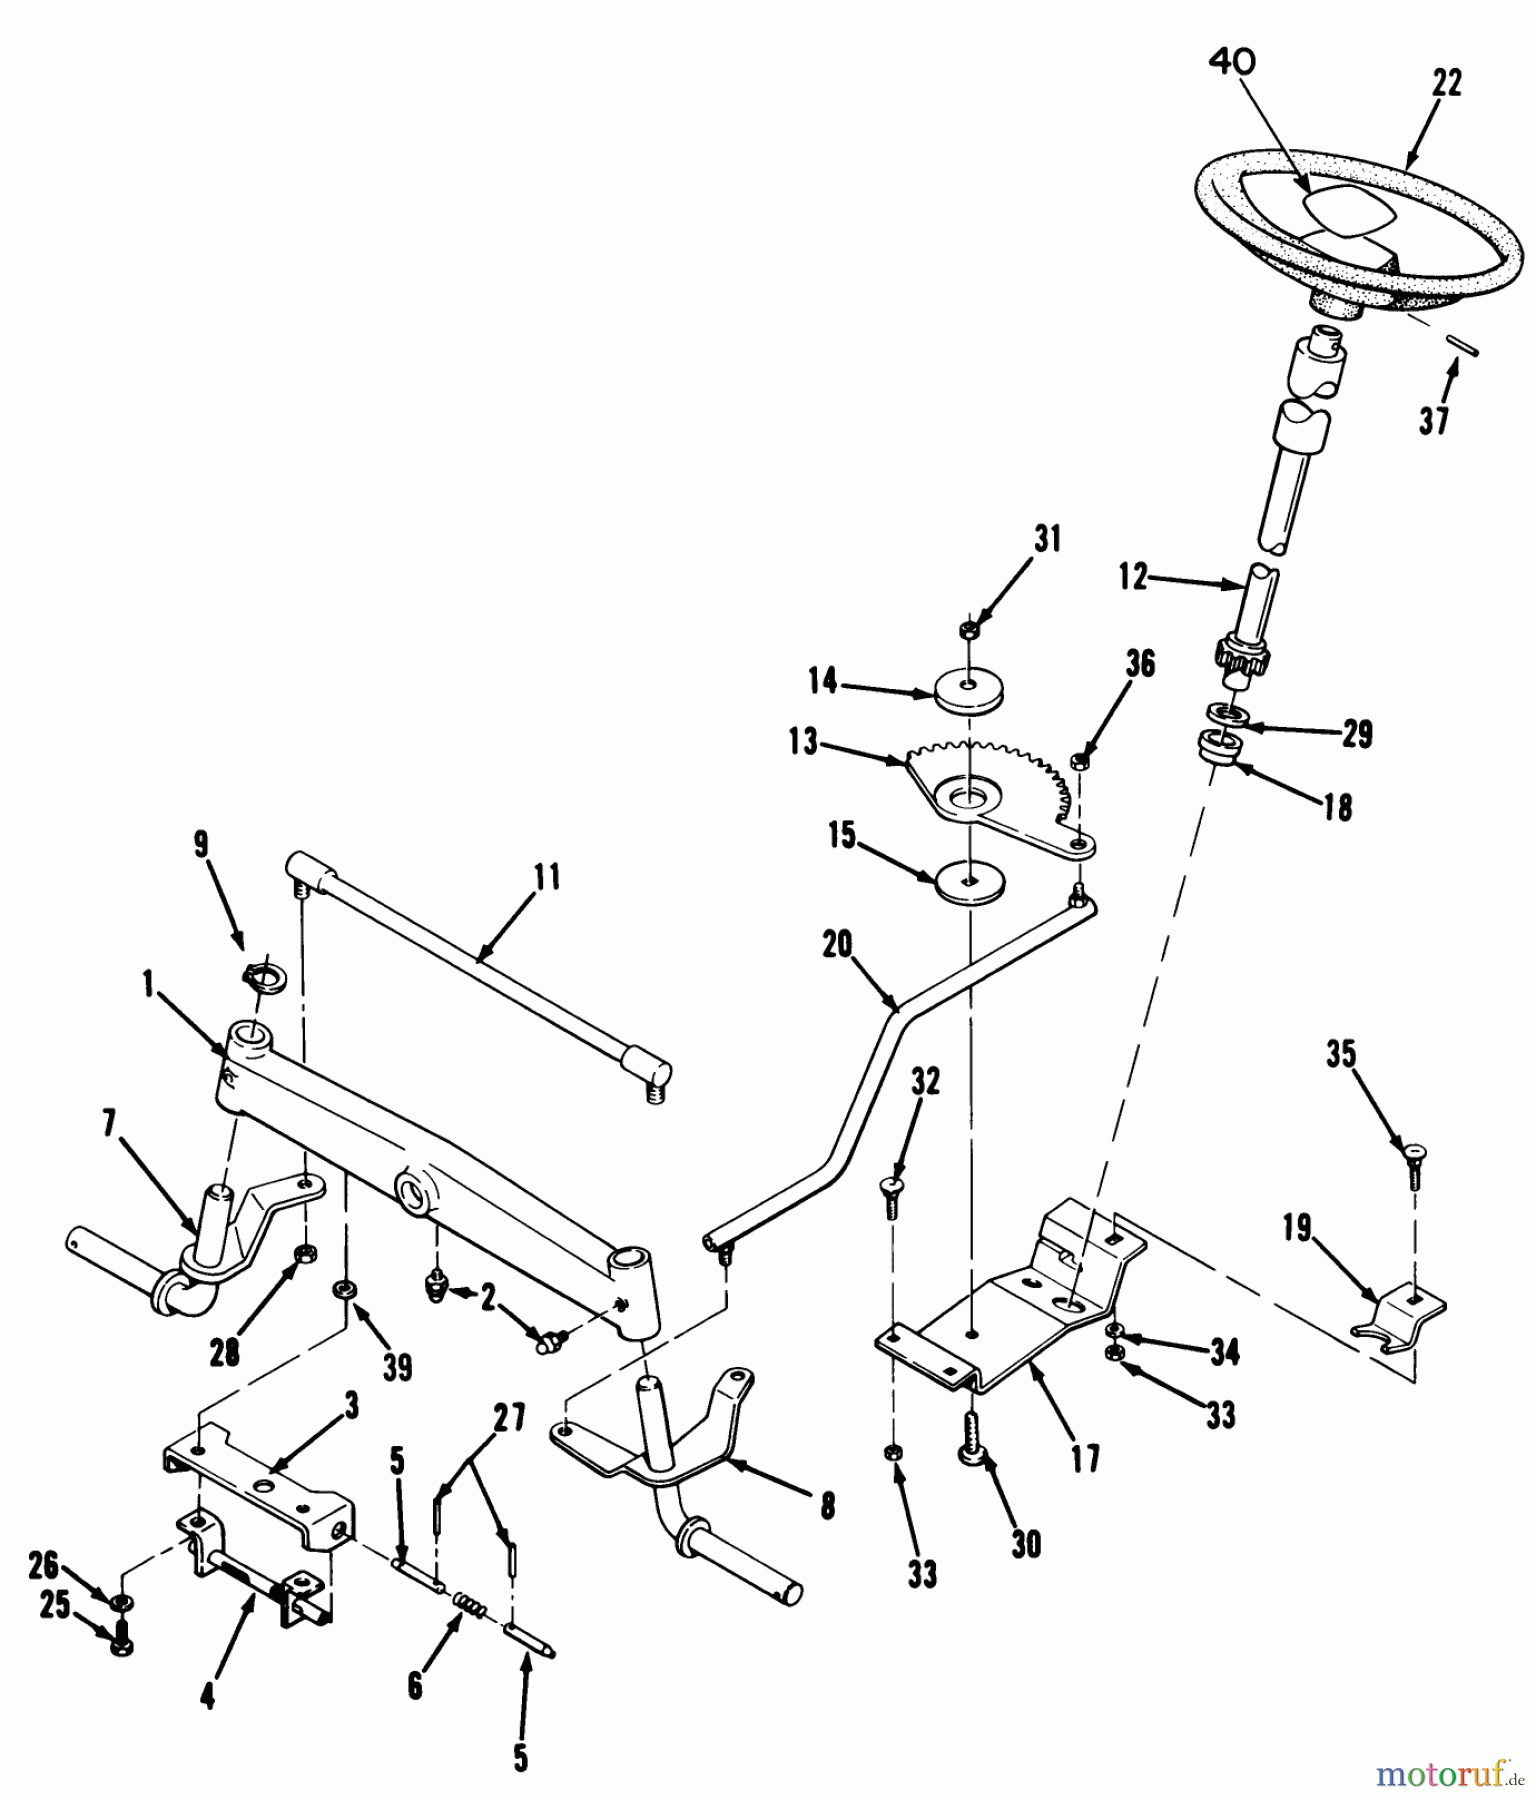  Toro Neu Mowers, Lawn & Garden Tractor Seite 2 R2-12O502 (212-5) - Toro 212-5 Tractor, 1992 (2000001-2999999) FRONT AXLE & STEERING ASSEMBLY